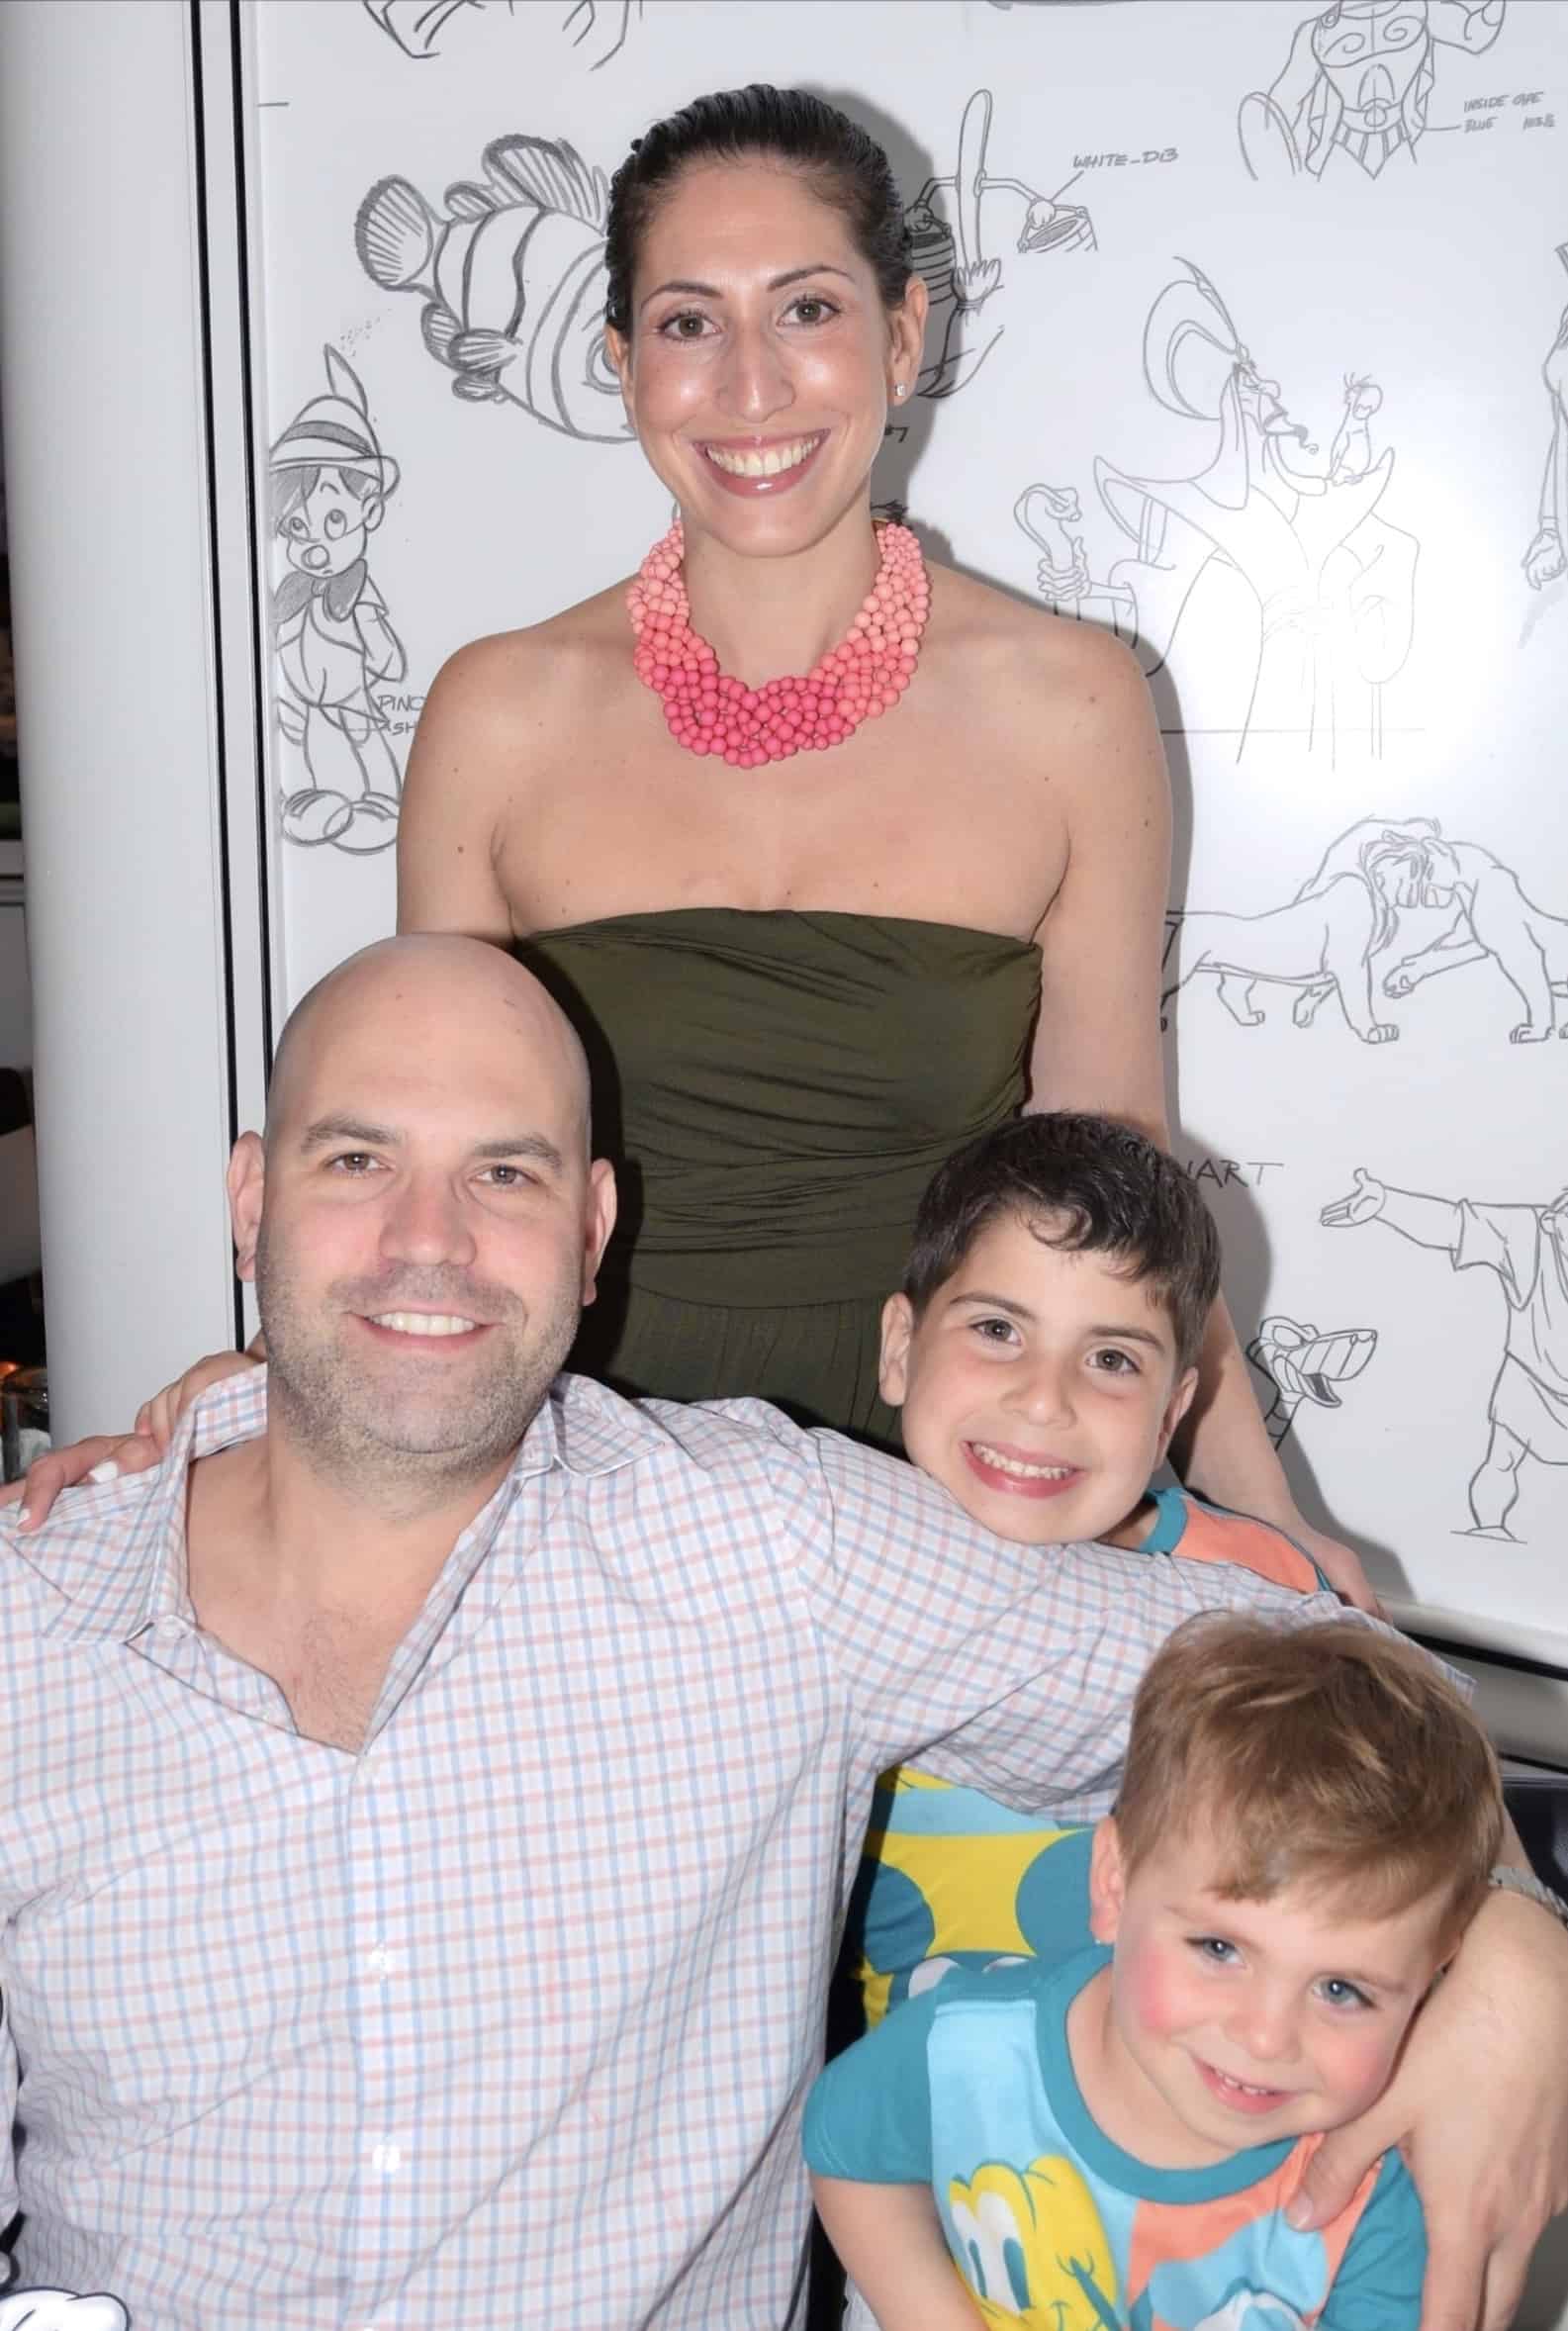 Two parents and their young children: Alyssa and David Kresman with children William, age 3, and Alexander age 6.